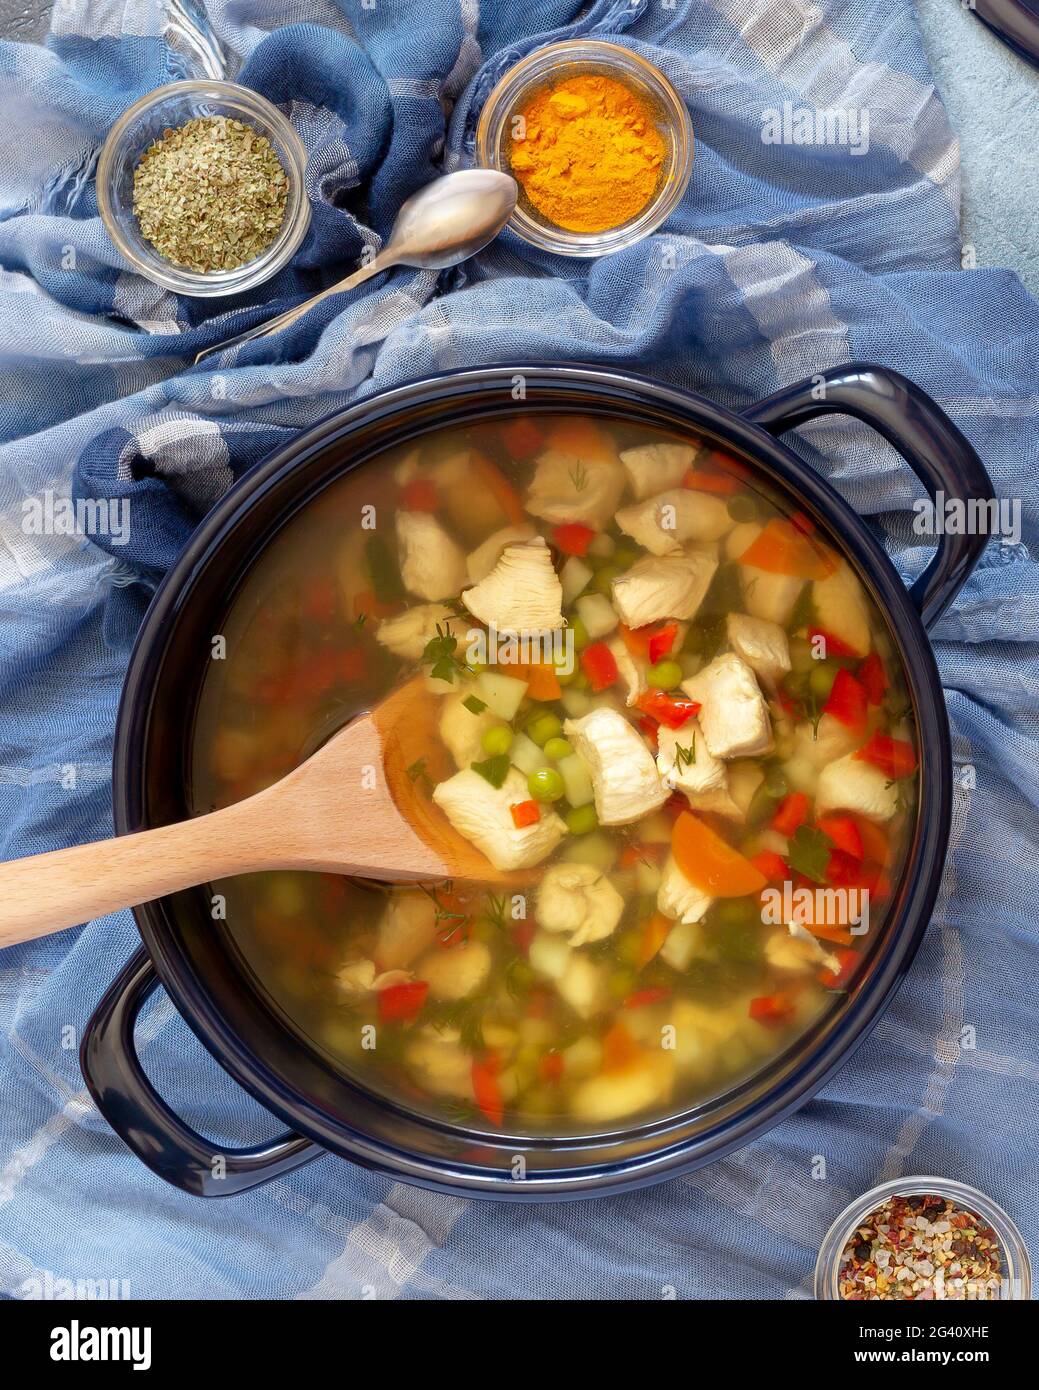 Jewish national cuisine. Vertical food composition with large pot with hot Jewish chicken soup and spices on a blue background. Healthy and tasty food Stock Photo